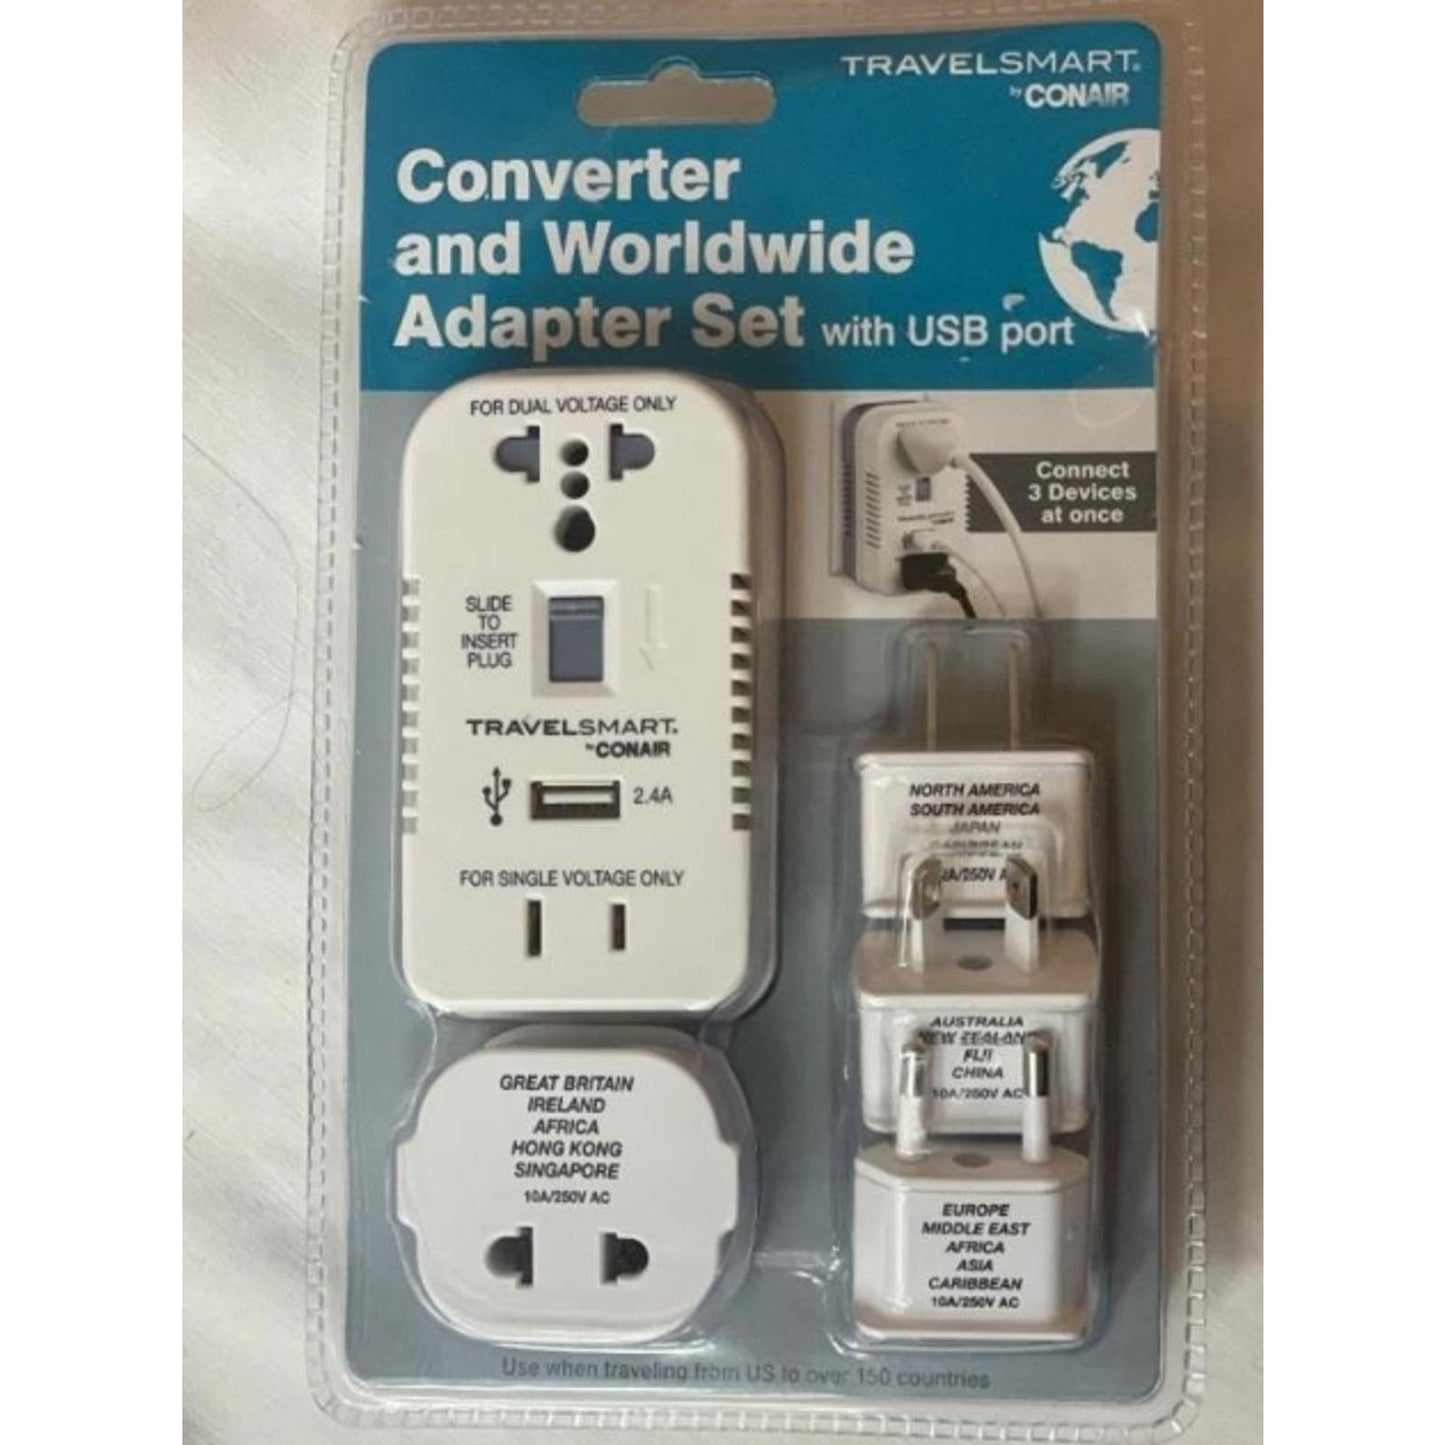 Converter and Worldwide Adapter Set with USB